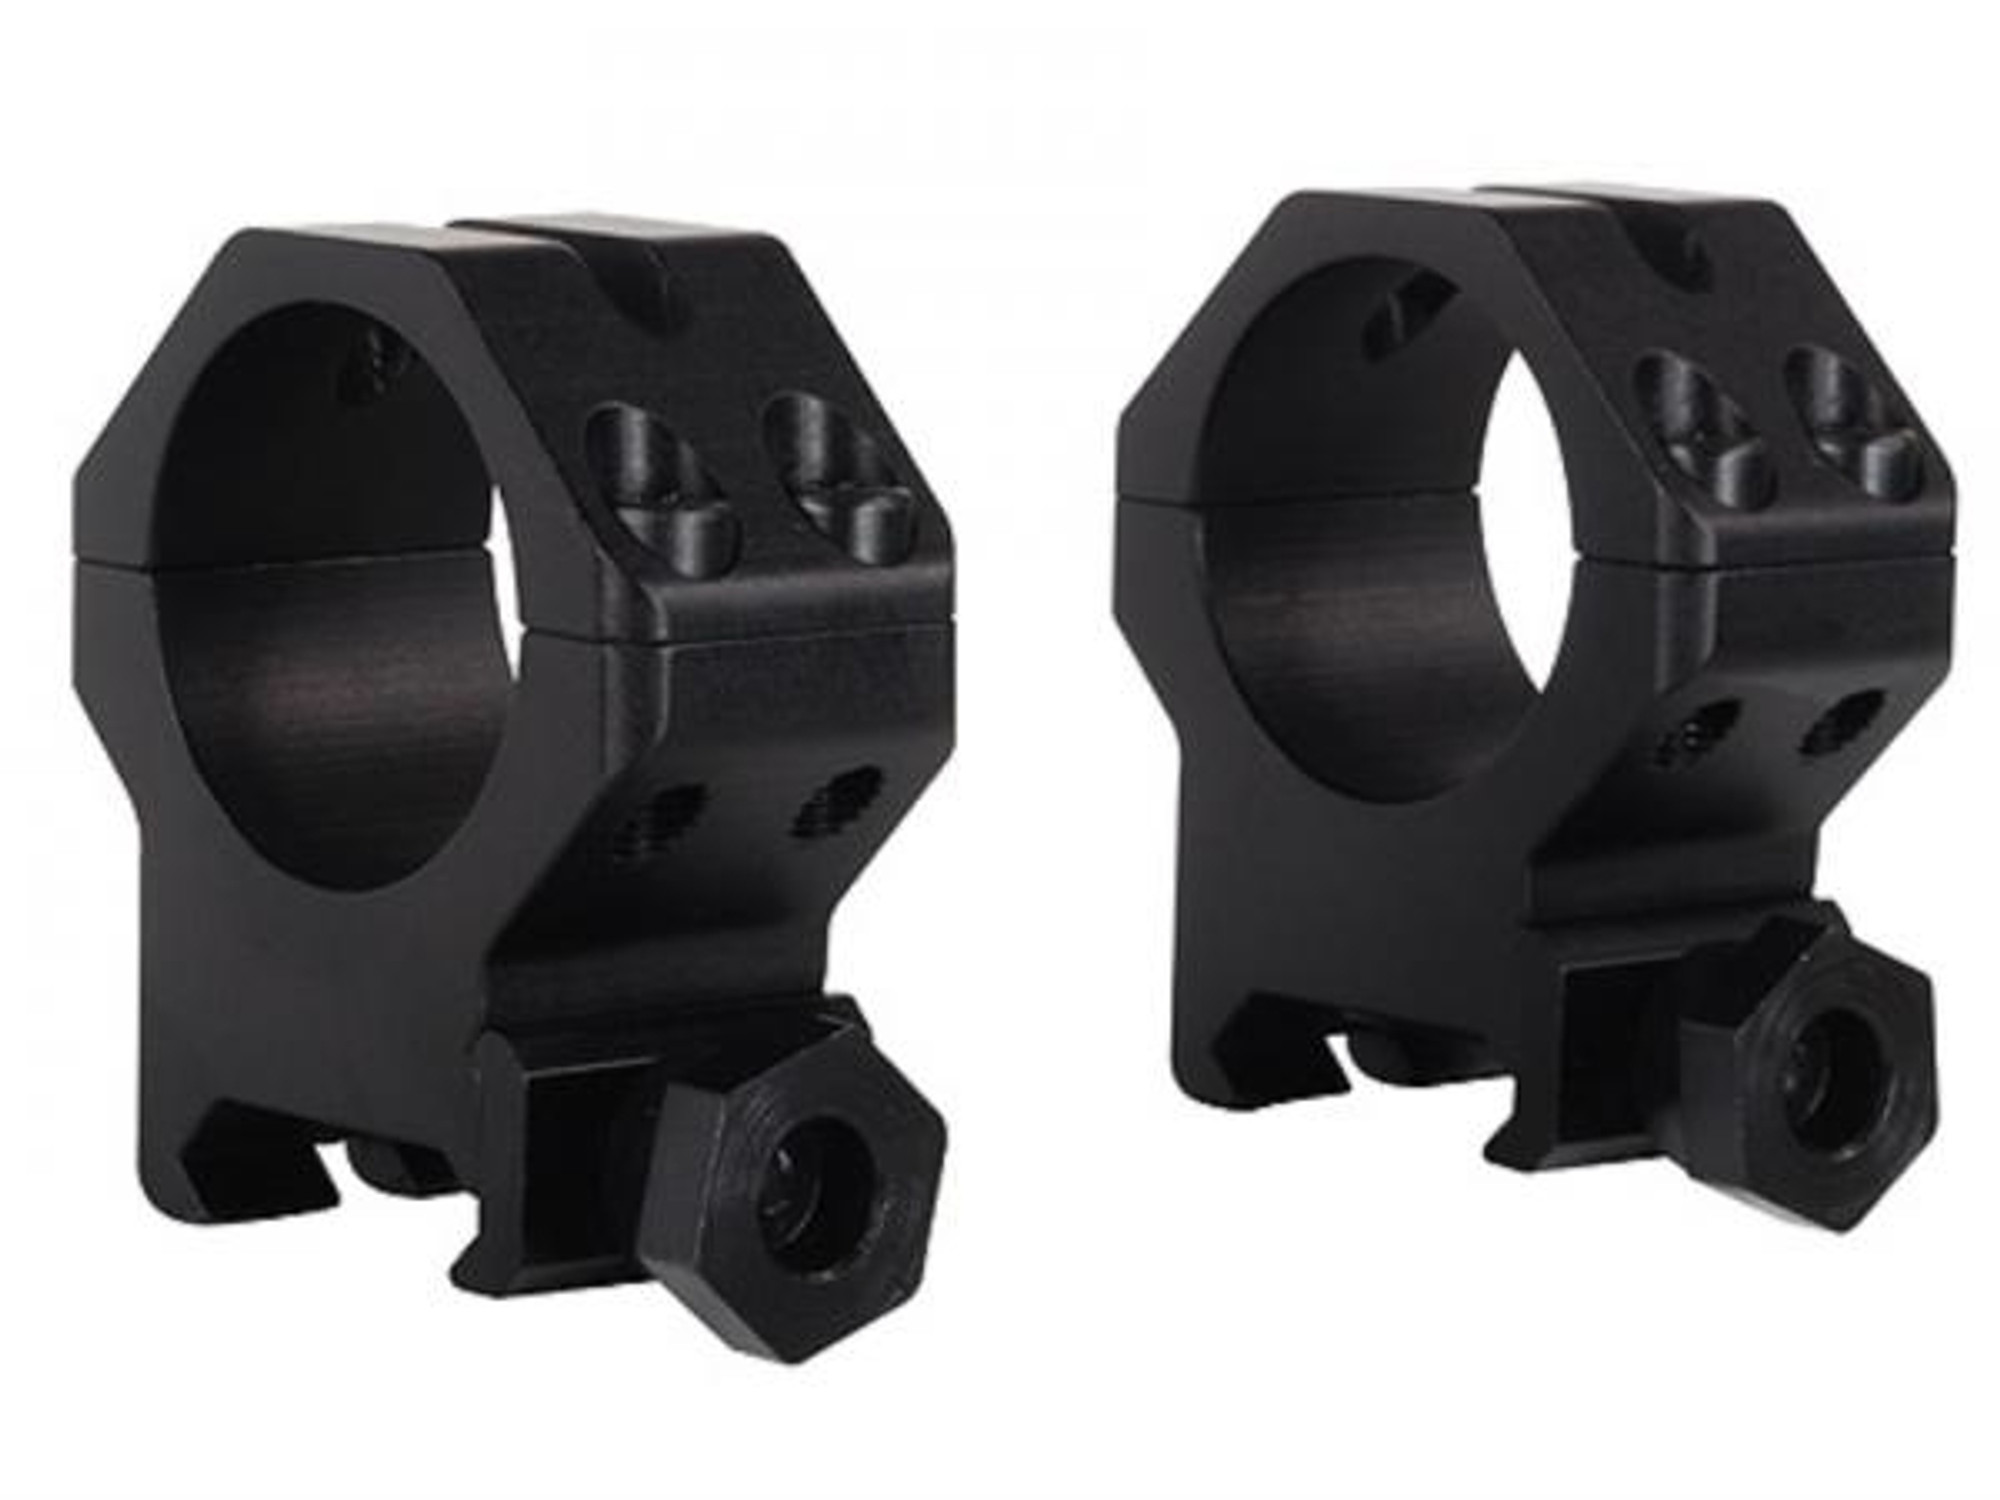 Four Hole Tactical Rings 1" Xx-high